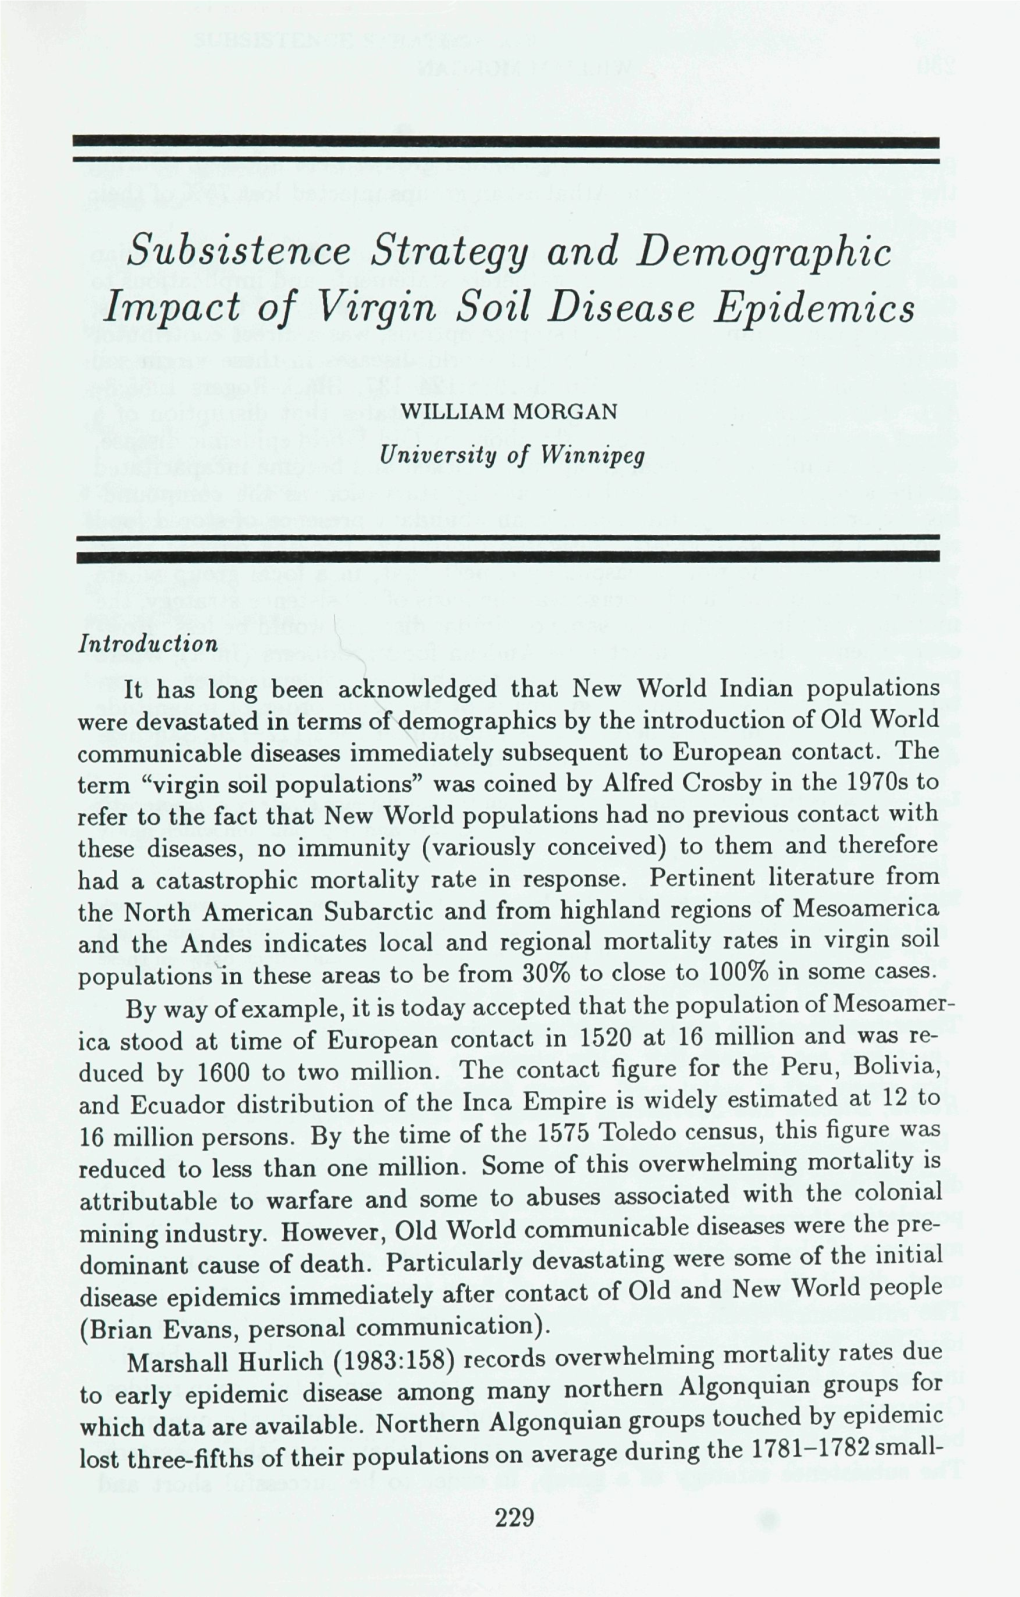 Subsistence Strategy and Demographic Impact of Virgin Soil Disease Epidemics